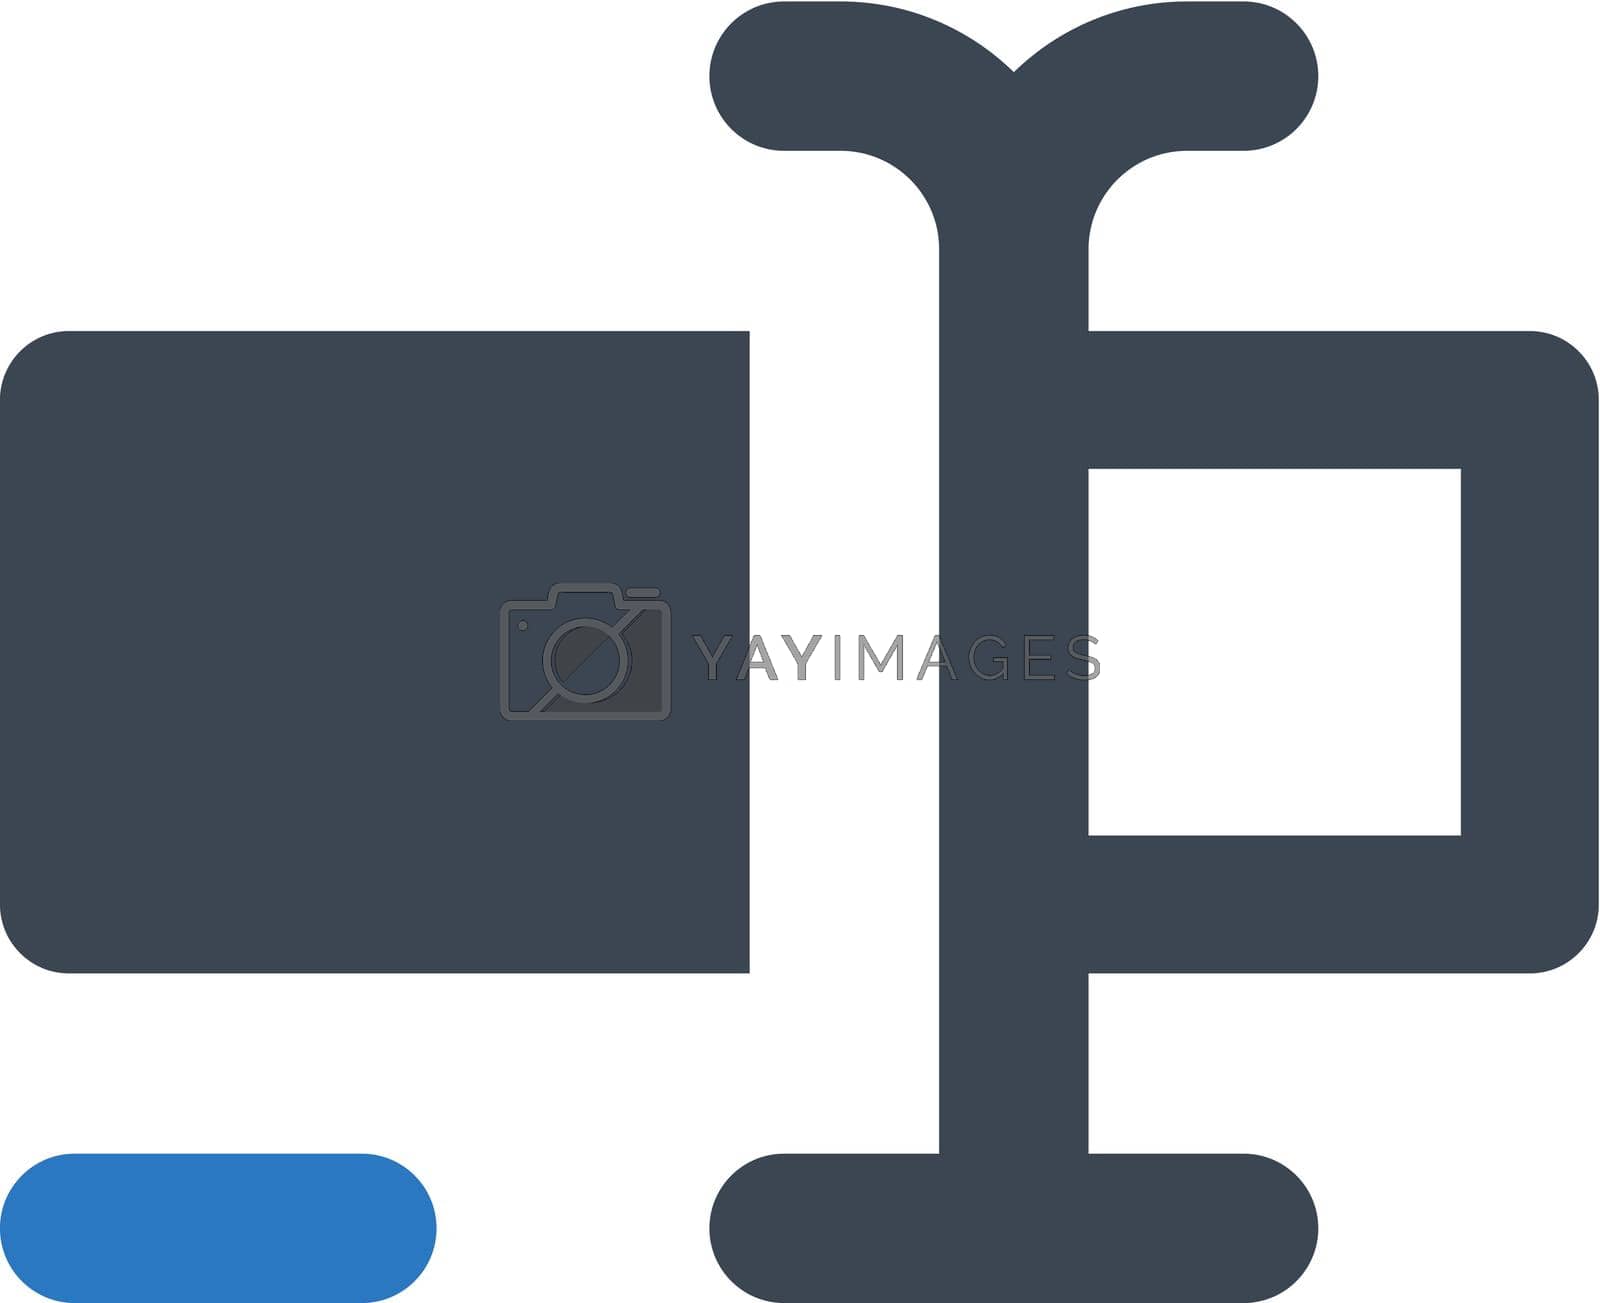 Royalty free image of Textfield icon. Vector EPS file. by delwar018